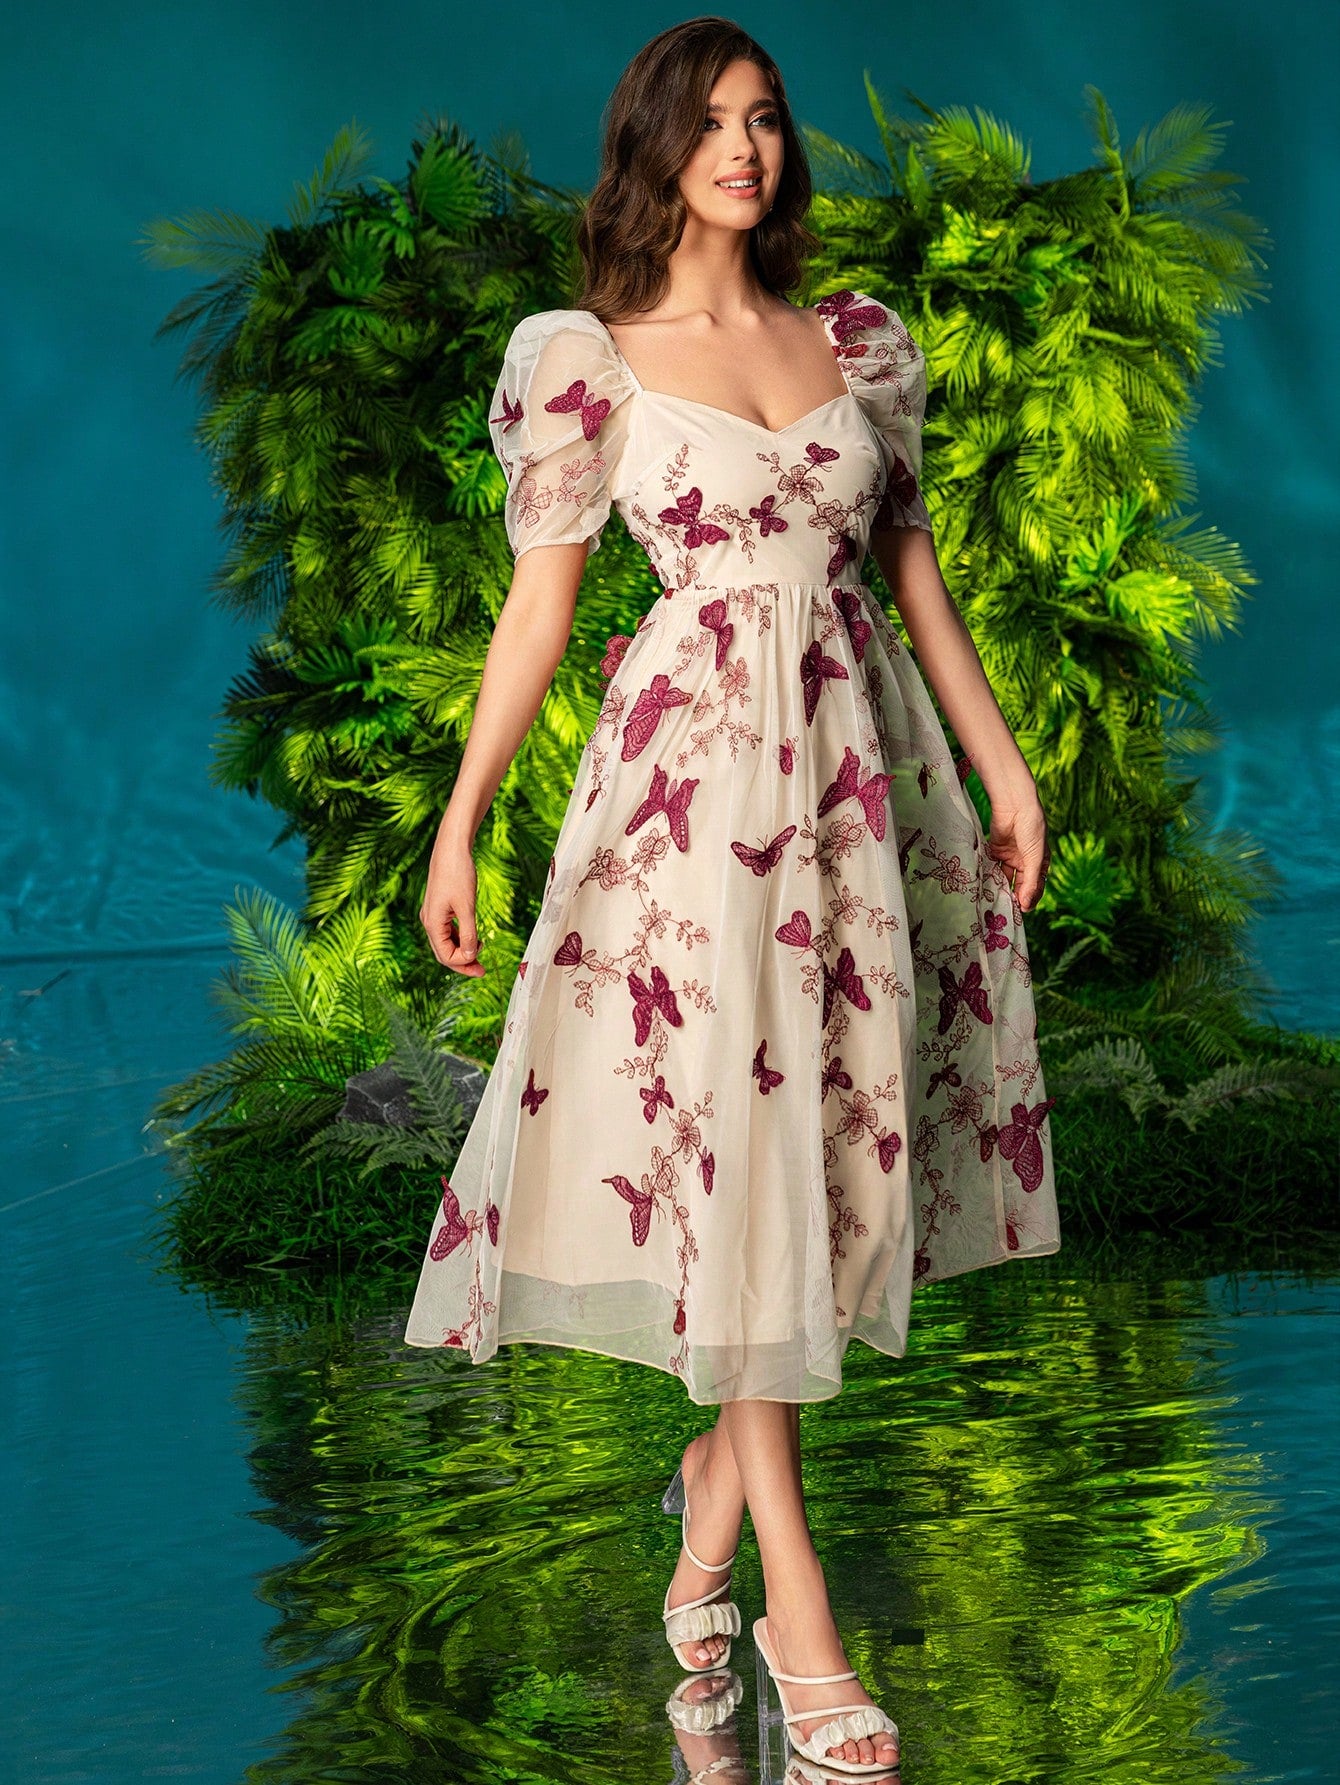 Classy Bubble Sleeves Dress With 3D Butterfly, Jewel Neckline, Cinched Waist And Side Split